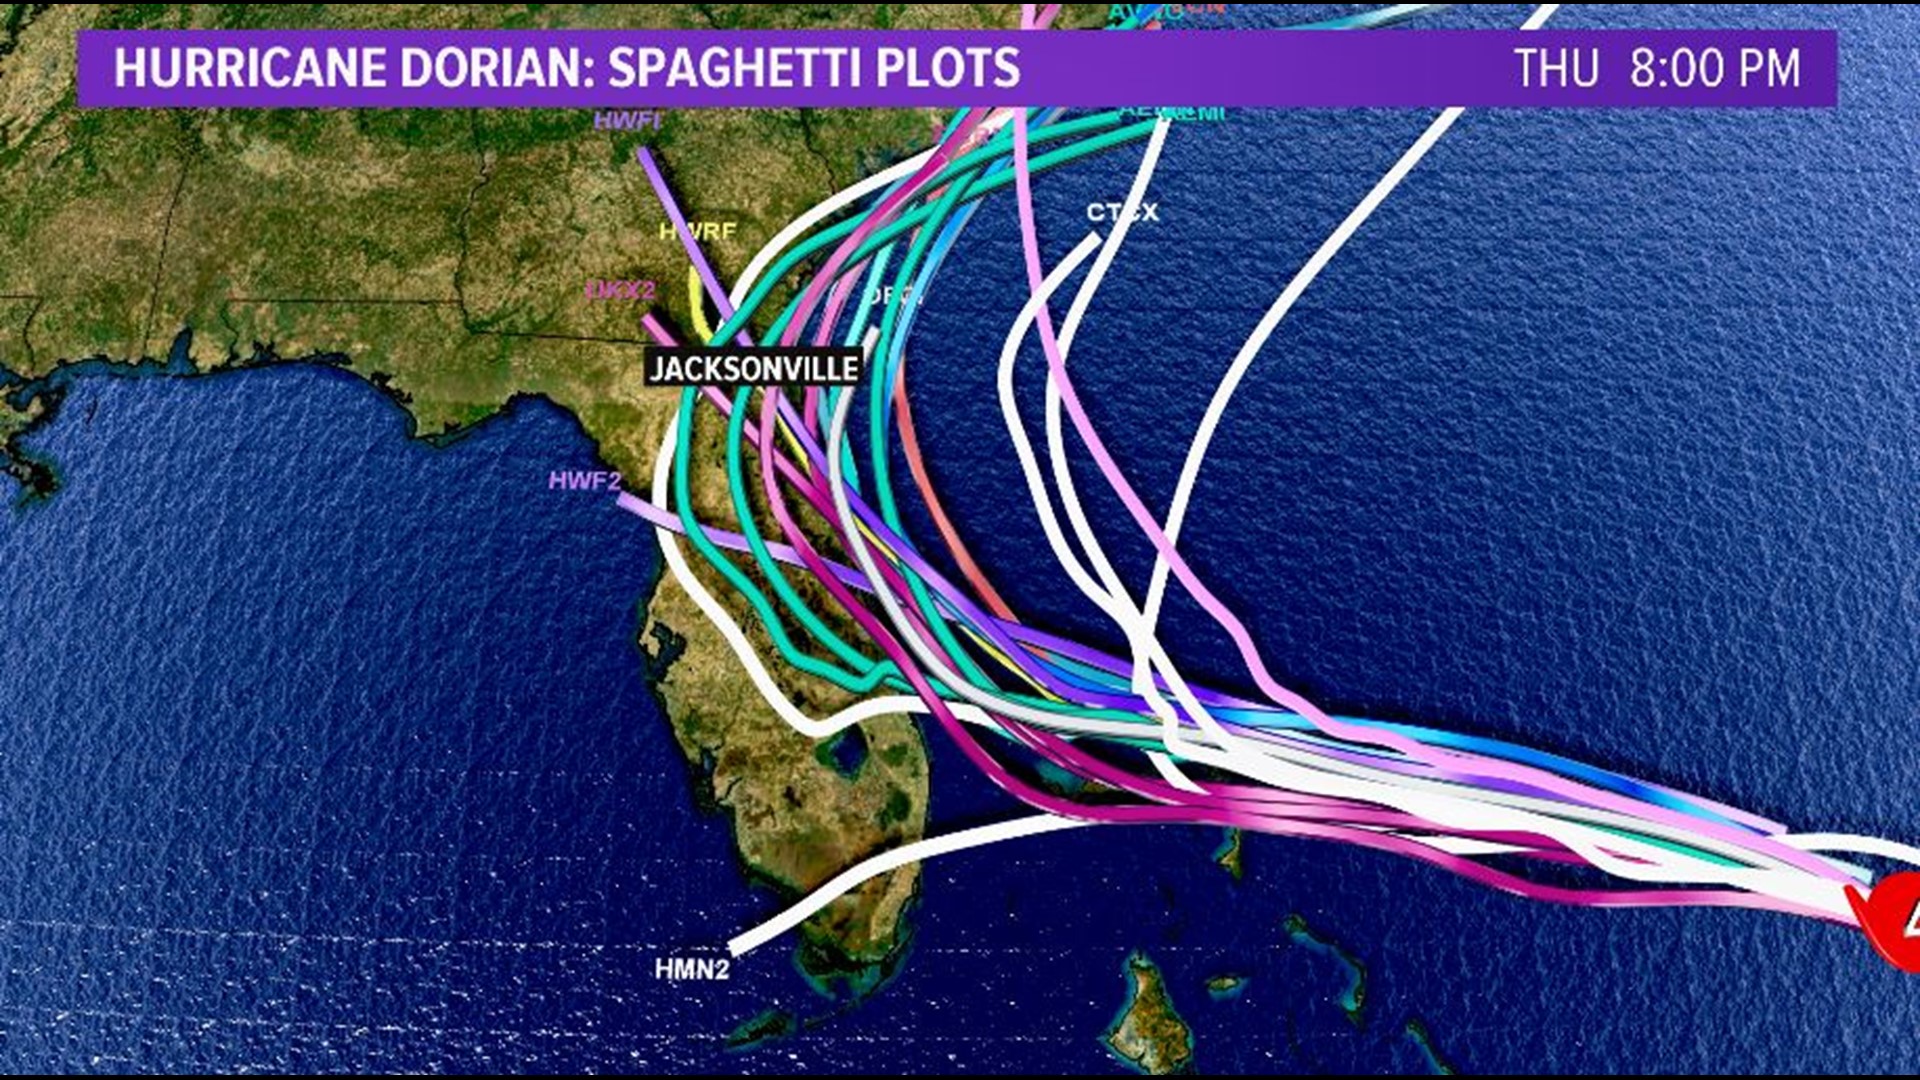 We've seen the models. It looks like a bunch of noodles on the wall. But what do spaghetti models mean and why are there so many?